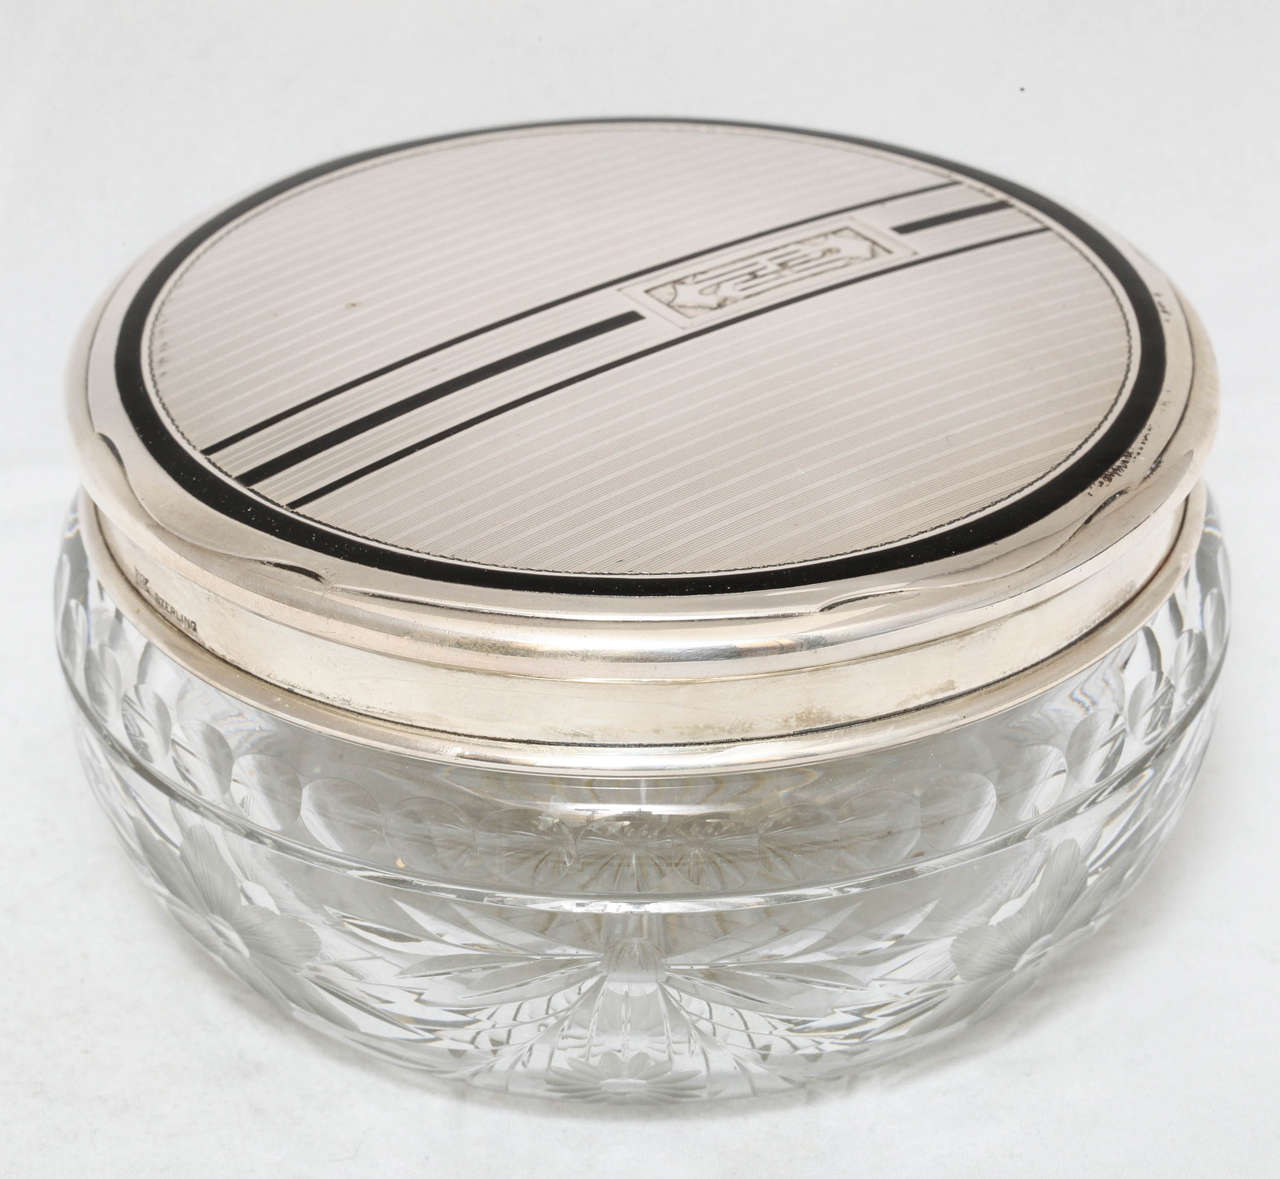 Lovely, Art Deco, sterling silver-mounted powder jar, Foster and Bailey, providence, Rhode Island, circa 1920s-1930s. Sterling silver lid is 